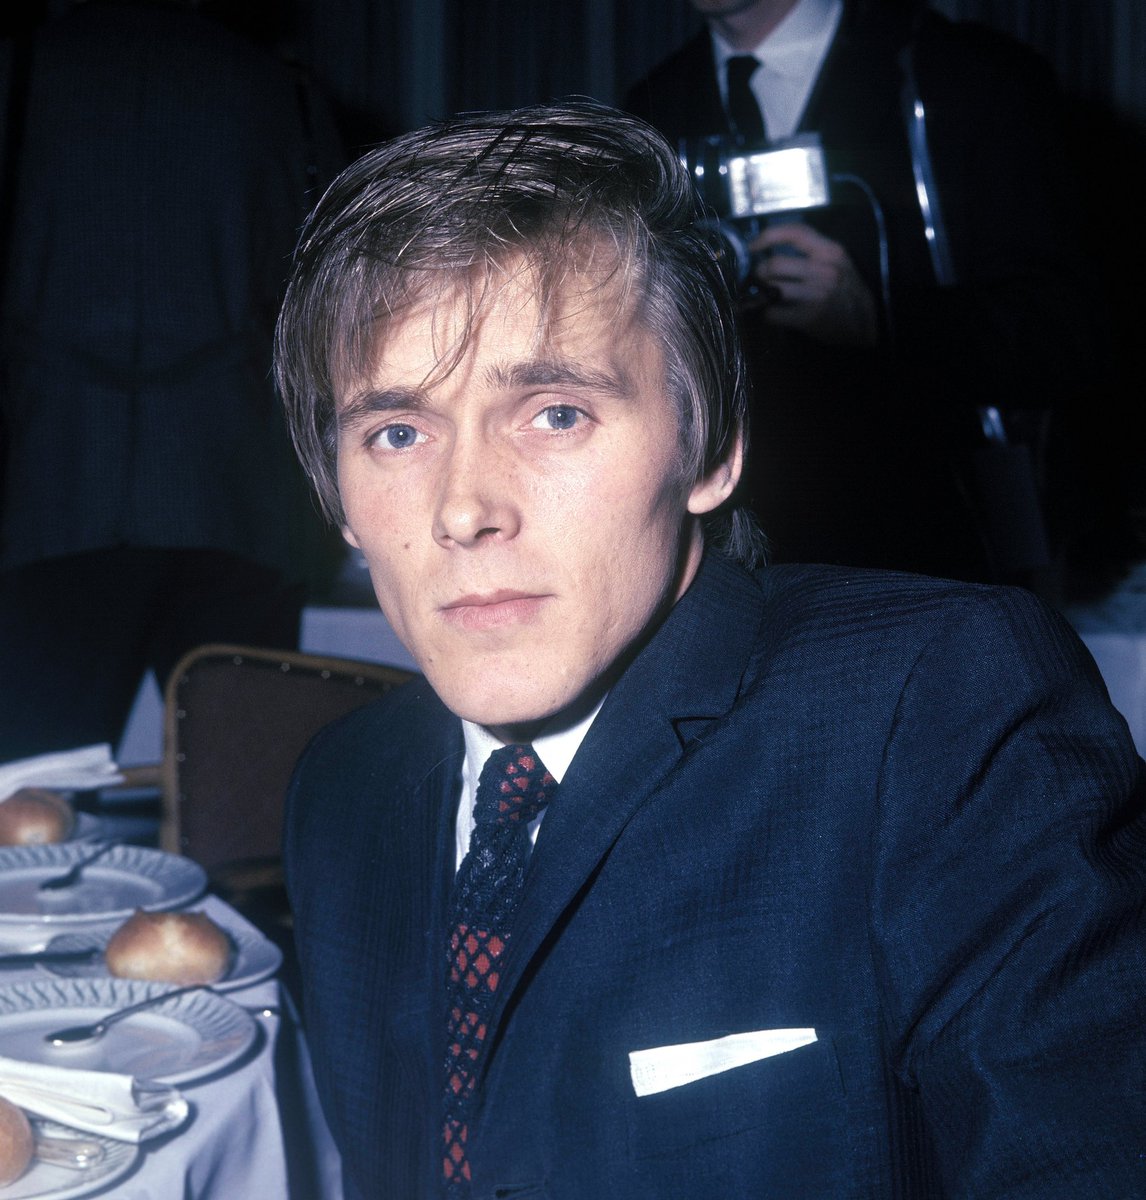 Newly discovered Billy photo, taken May 1967.
#billyfury